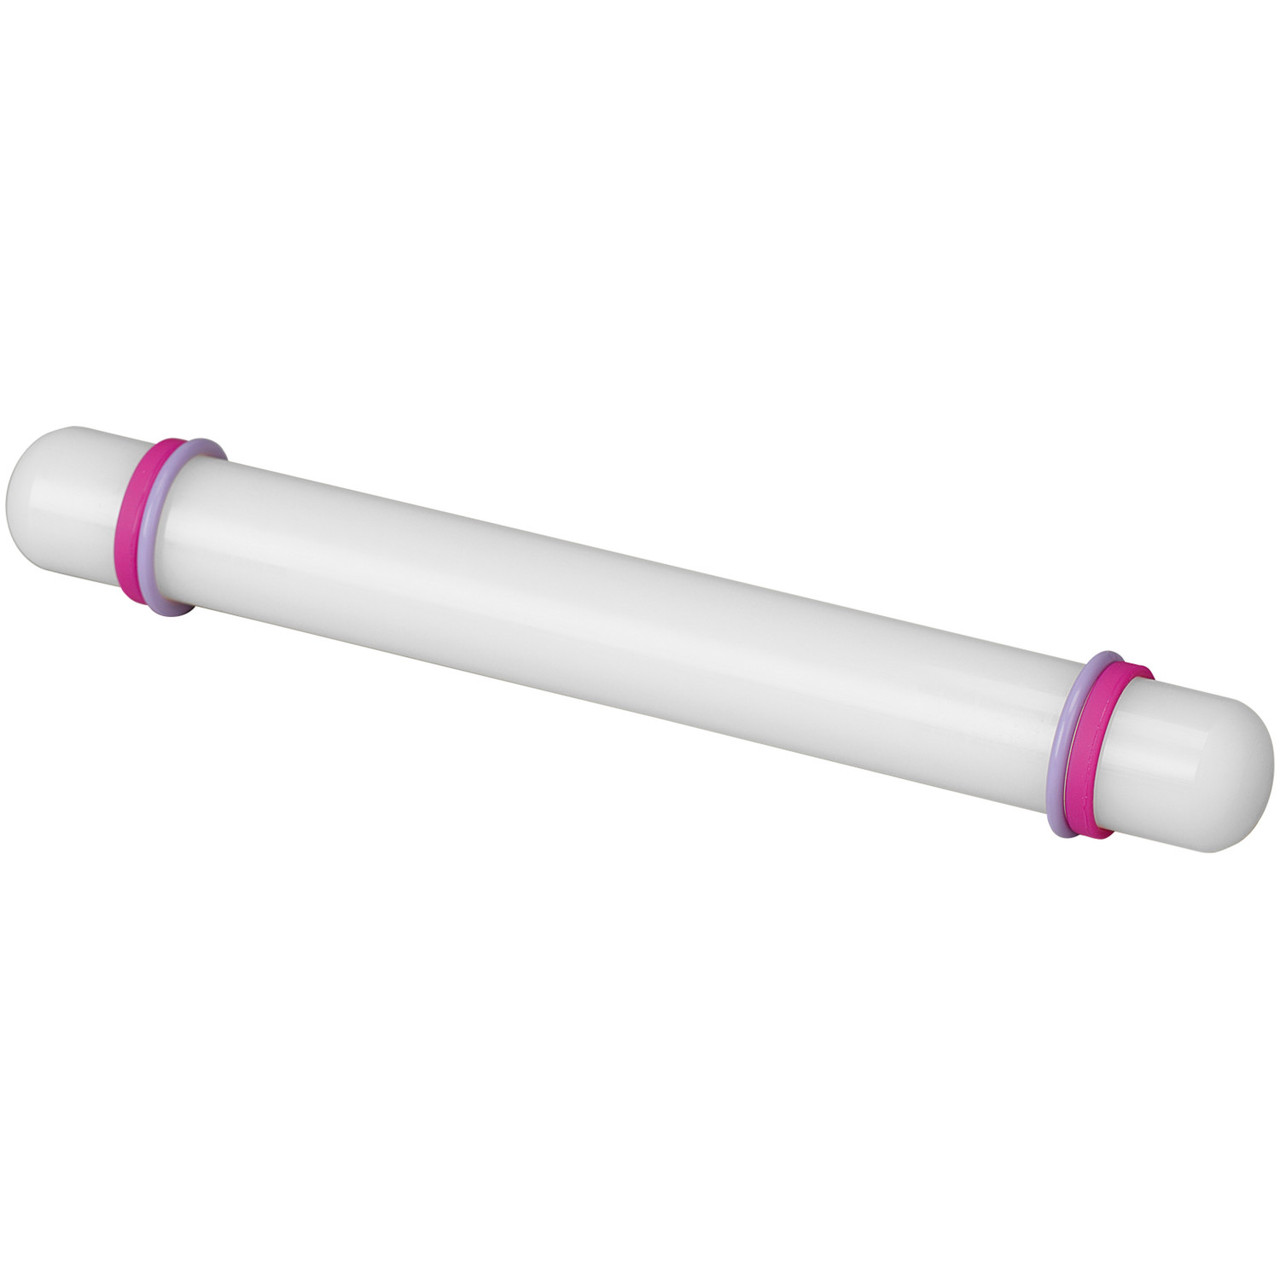 Wilton 9 Fondant Roller With 1/8 & 1/16 Guide Rings